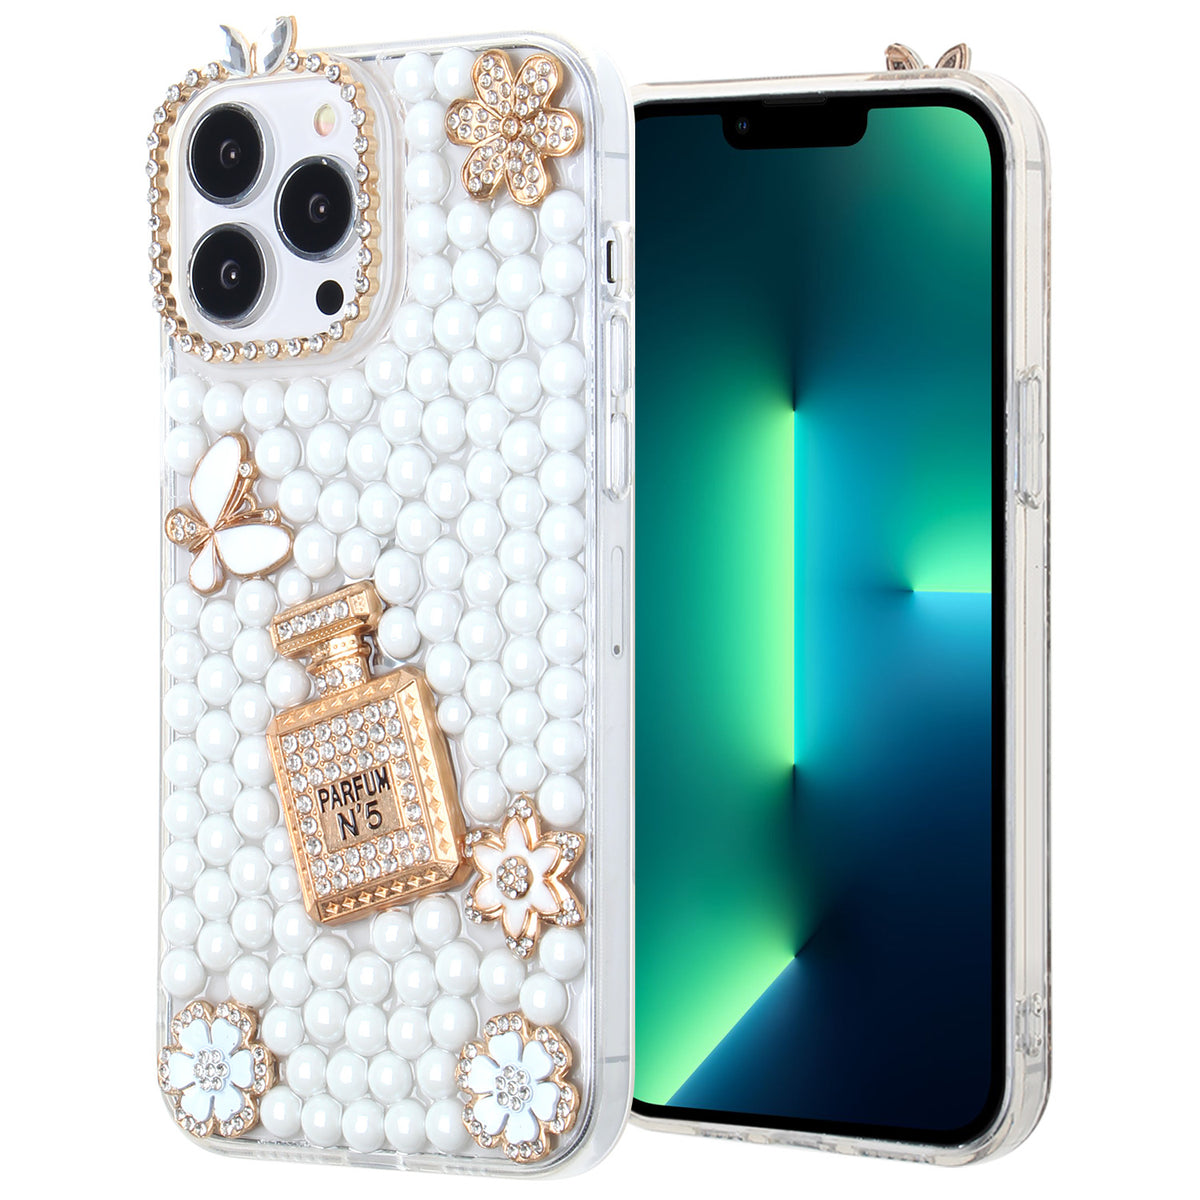 Iphone 11 (6.1Inch) White Pearl Diamond Case with Perfume